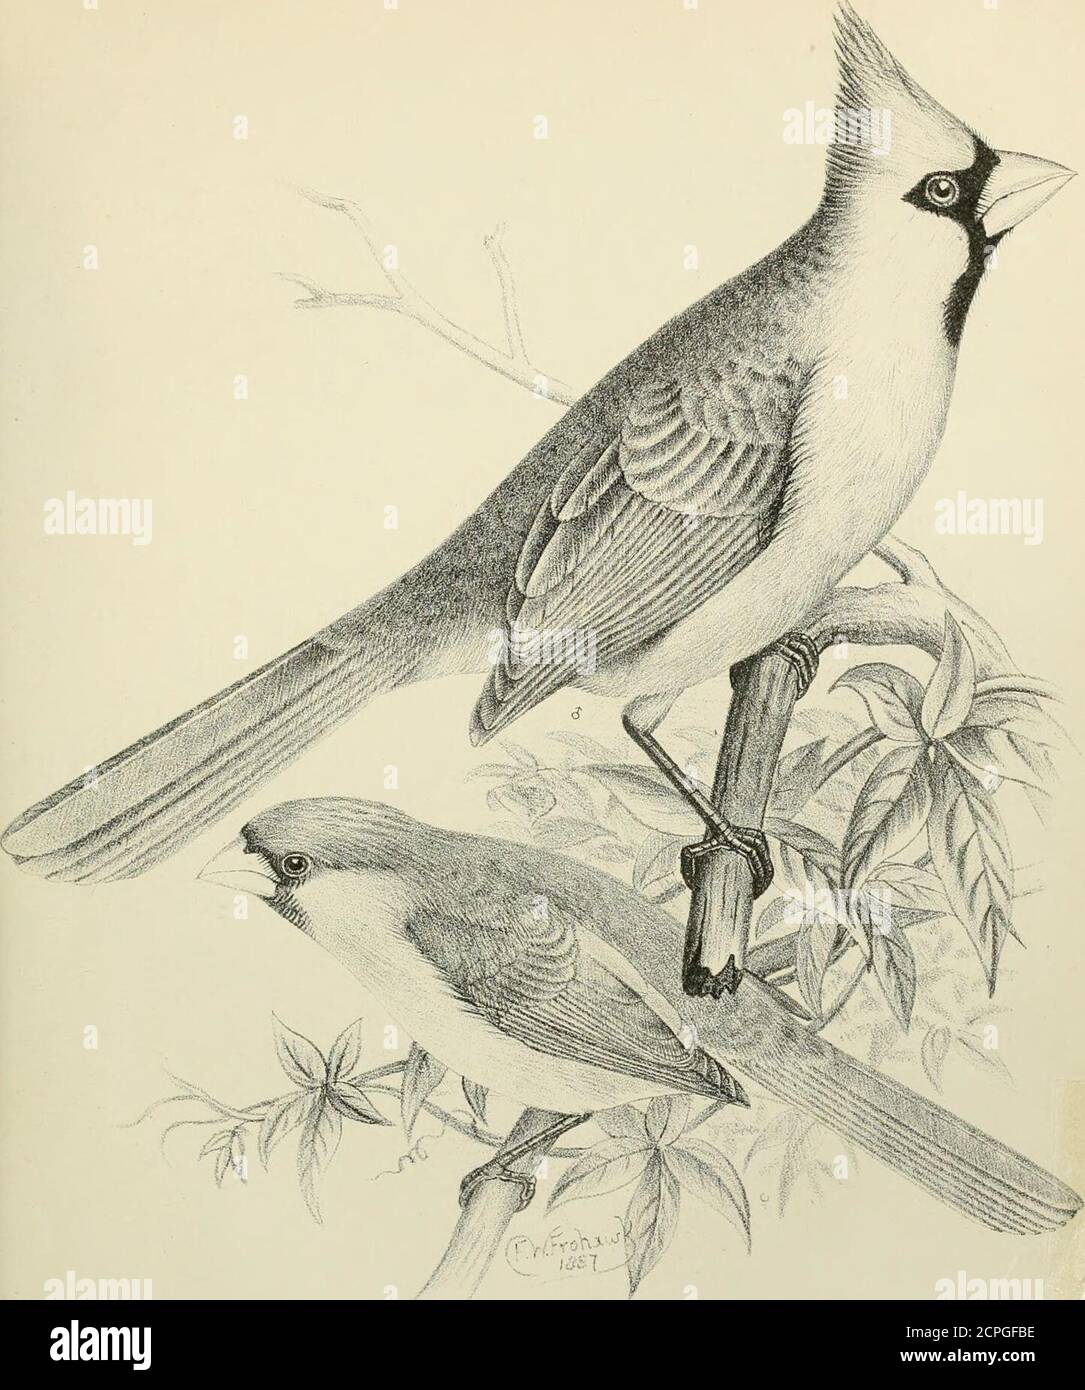 . A monograph of the weaver-birds, Ploceidand arboreal and terrestrial finches, Fringillid . breadth. Specimens examined. No. Ser. Mns. Locality. Length. Wing. Tail. Tars. Cnlm, a. (?) E.B. Java. 5-65 0-0 20 0-7 0-6 I. (?) E.B. Java. 5-55 2-65 1-95 07 0-6 c. (?) E.B. (?) 5-6 2-65 20 0-7 0-68 d. &lt;y E.B. Java {H. Blytli). 5-2 2-8 1-9 0-7 0-6 e. ? E.B. India {A. Johnstone) . 4-75 2-7 1-9 075 0-6 f- &lt;y E.B. (?) 5-7 2-7 2-0 075 0-65 9- (?) E.B. (?) 5-5 2-7 1-95 075 0-65 h. (?) E.B. (?) 51 2-65 20 07 0-65 i. ^ E.B. Malacca. 5-5 2-75 20 075 0-65 j- &lt;? E.B. Australia. 50 2-75 20 07 0-65 h. (? Stock Photo